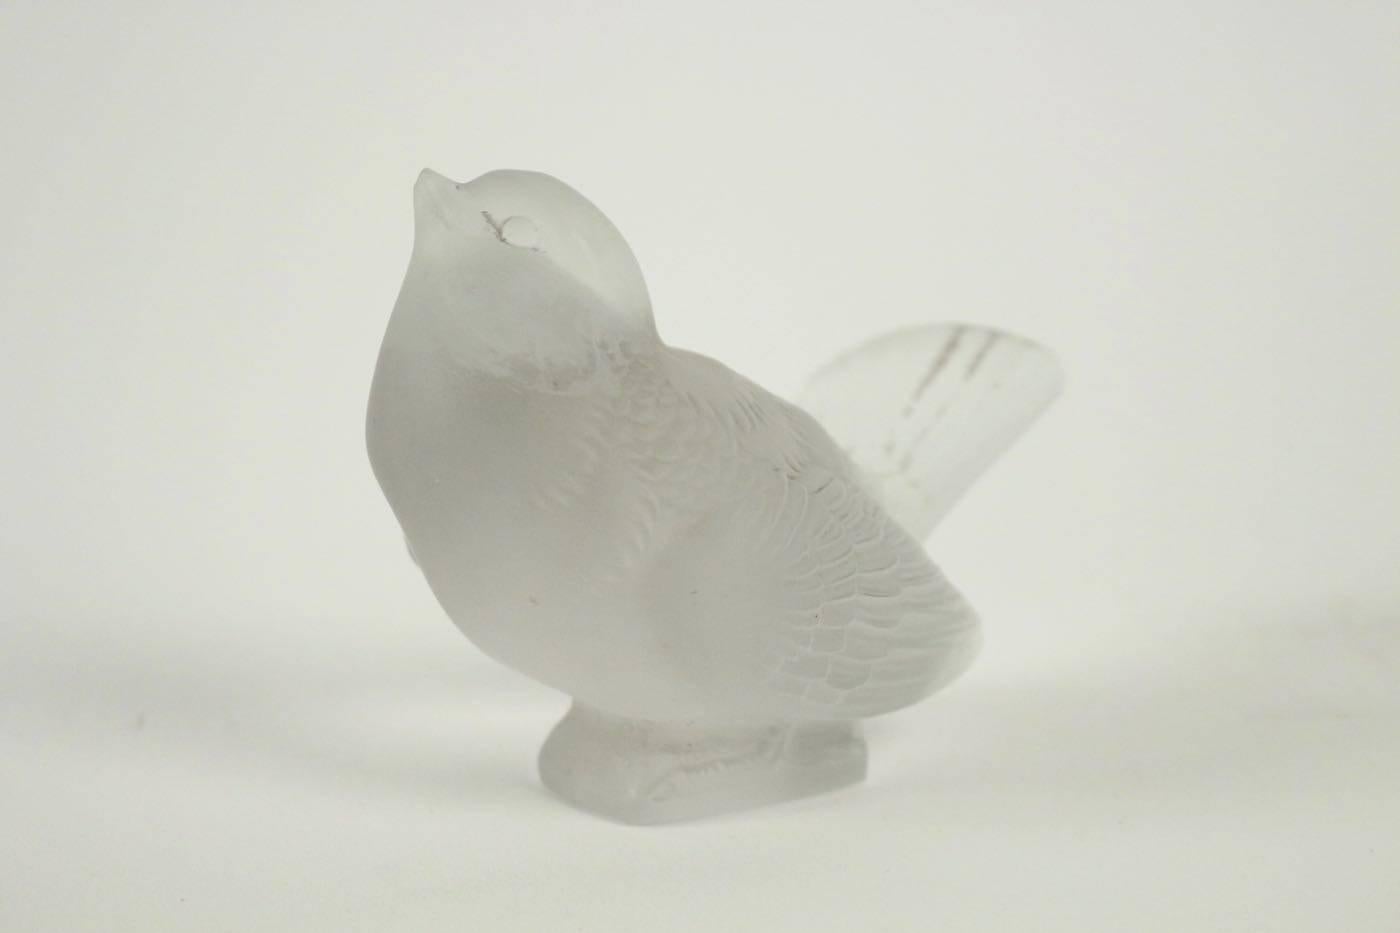 René Lalique Moineau:
8.5 cm tall upward looking frosted glass bird figure R. Lalique paperweight.
Lalique Presse-Papiers Moineau Moqueur: Frosted glass bird figure with the beak and tail both pointing up and the wings tucked down R. Lalique